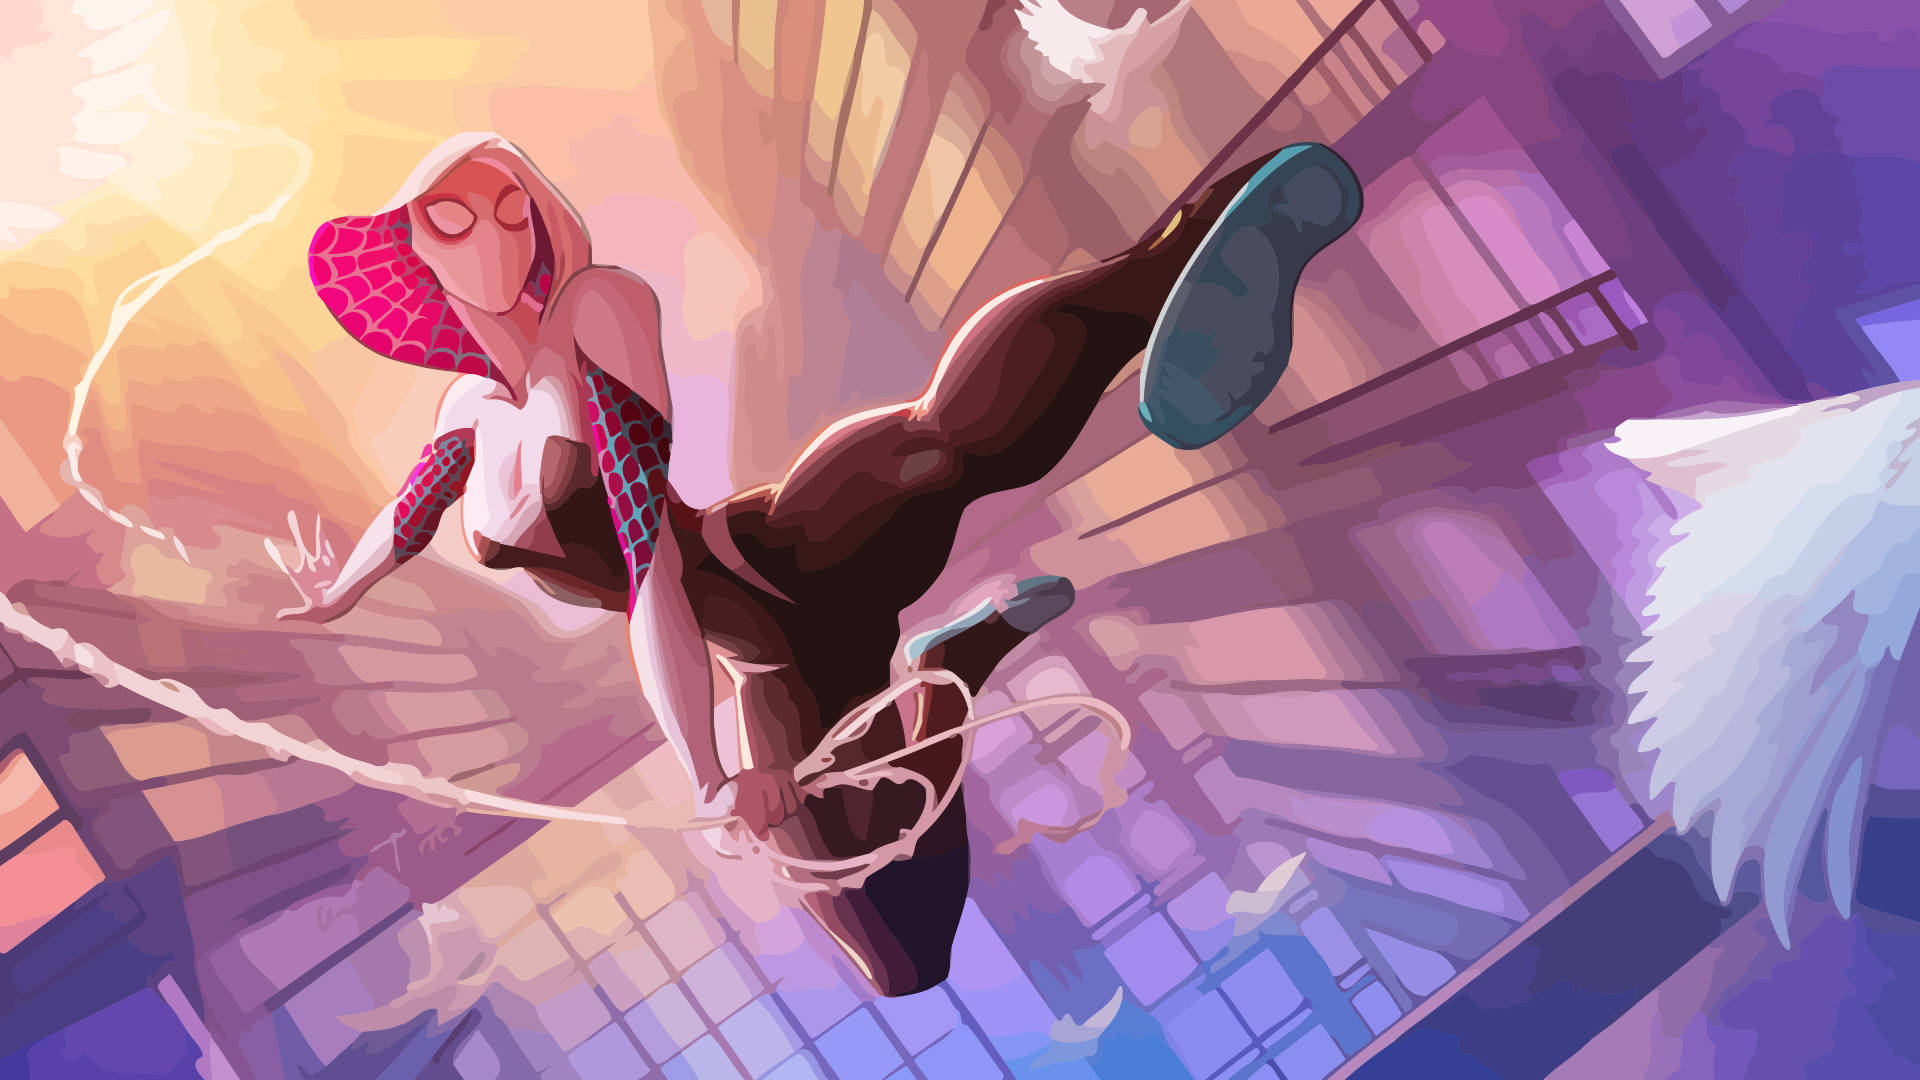 Top 999+ Spider Gwen Wallpaper Full HD, 4K✅Free to Use